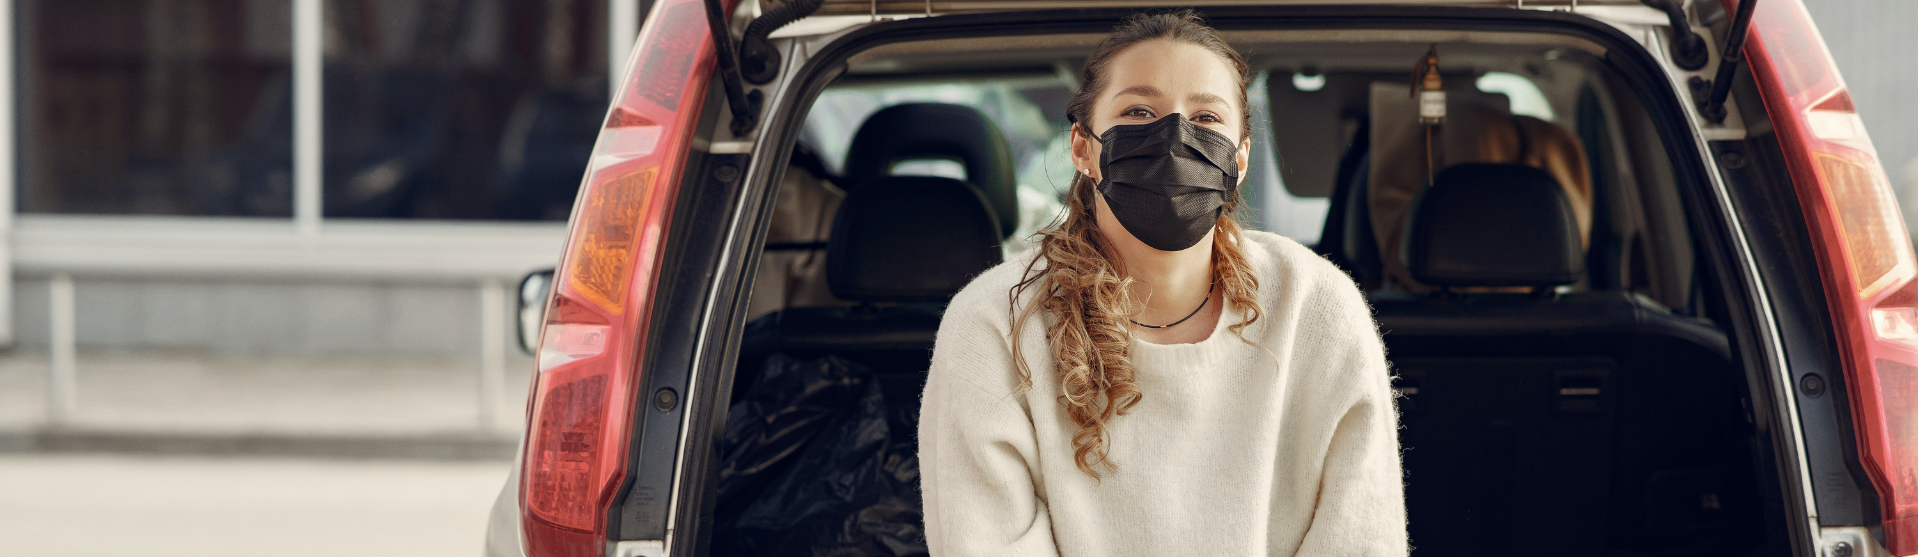 Girl with a face mask behind a car